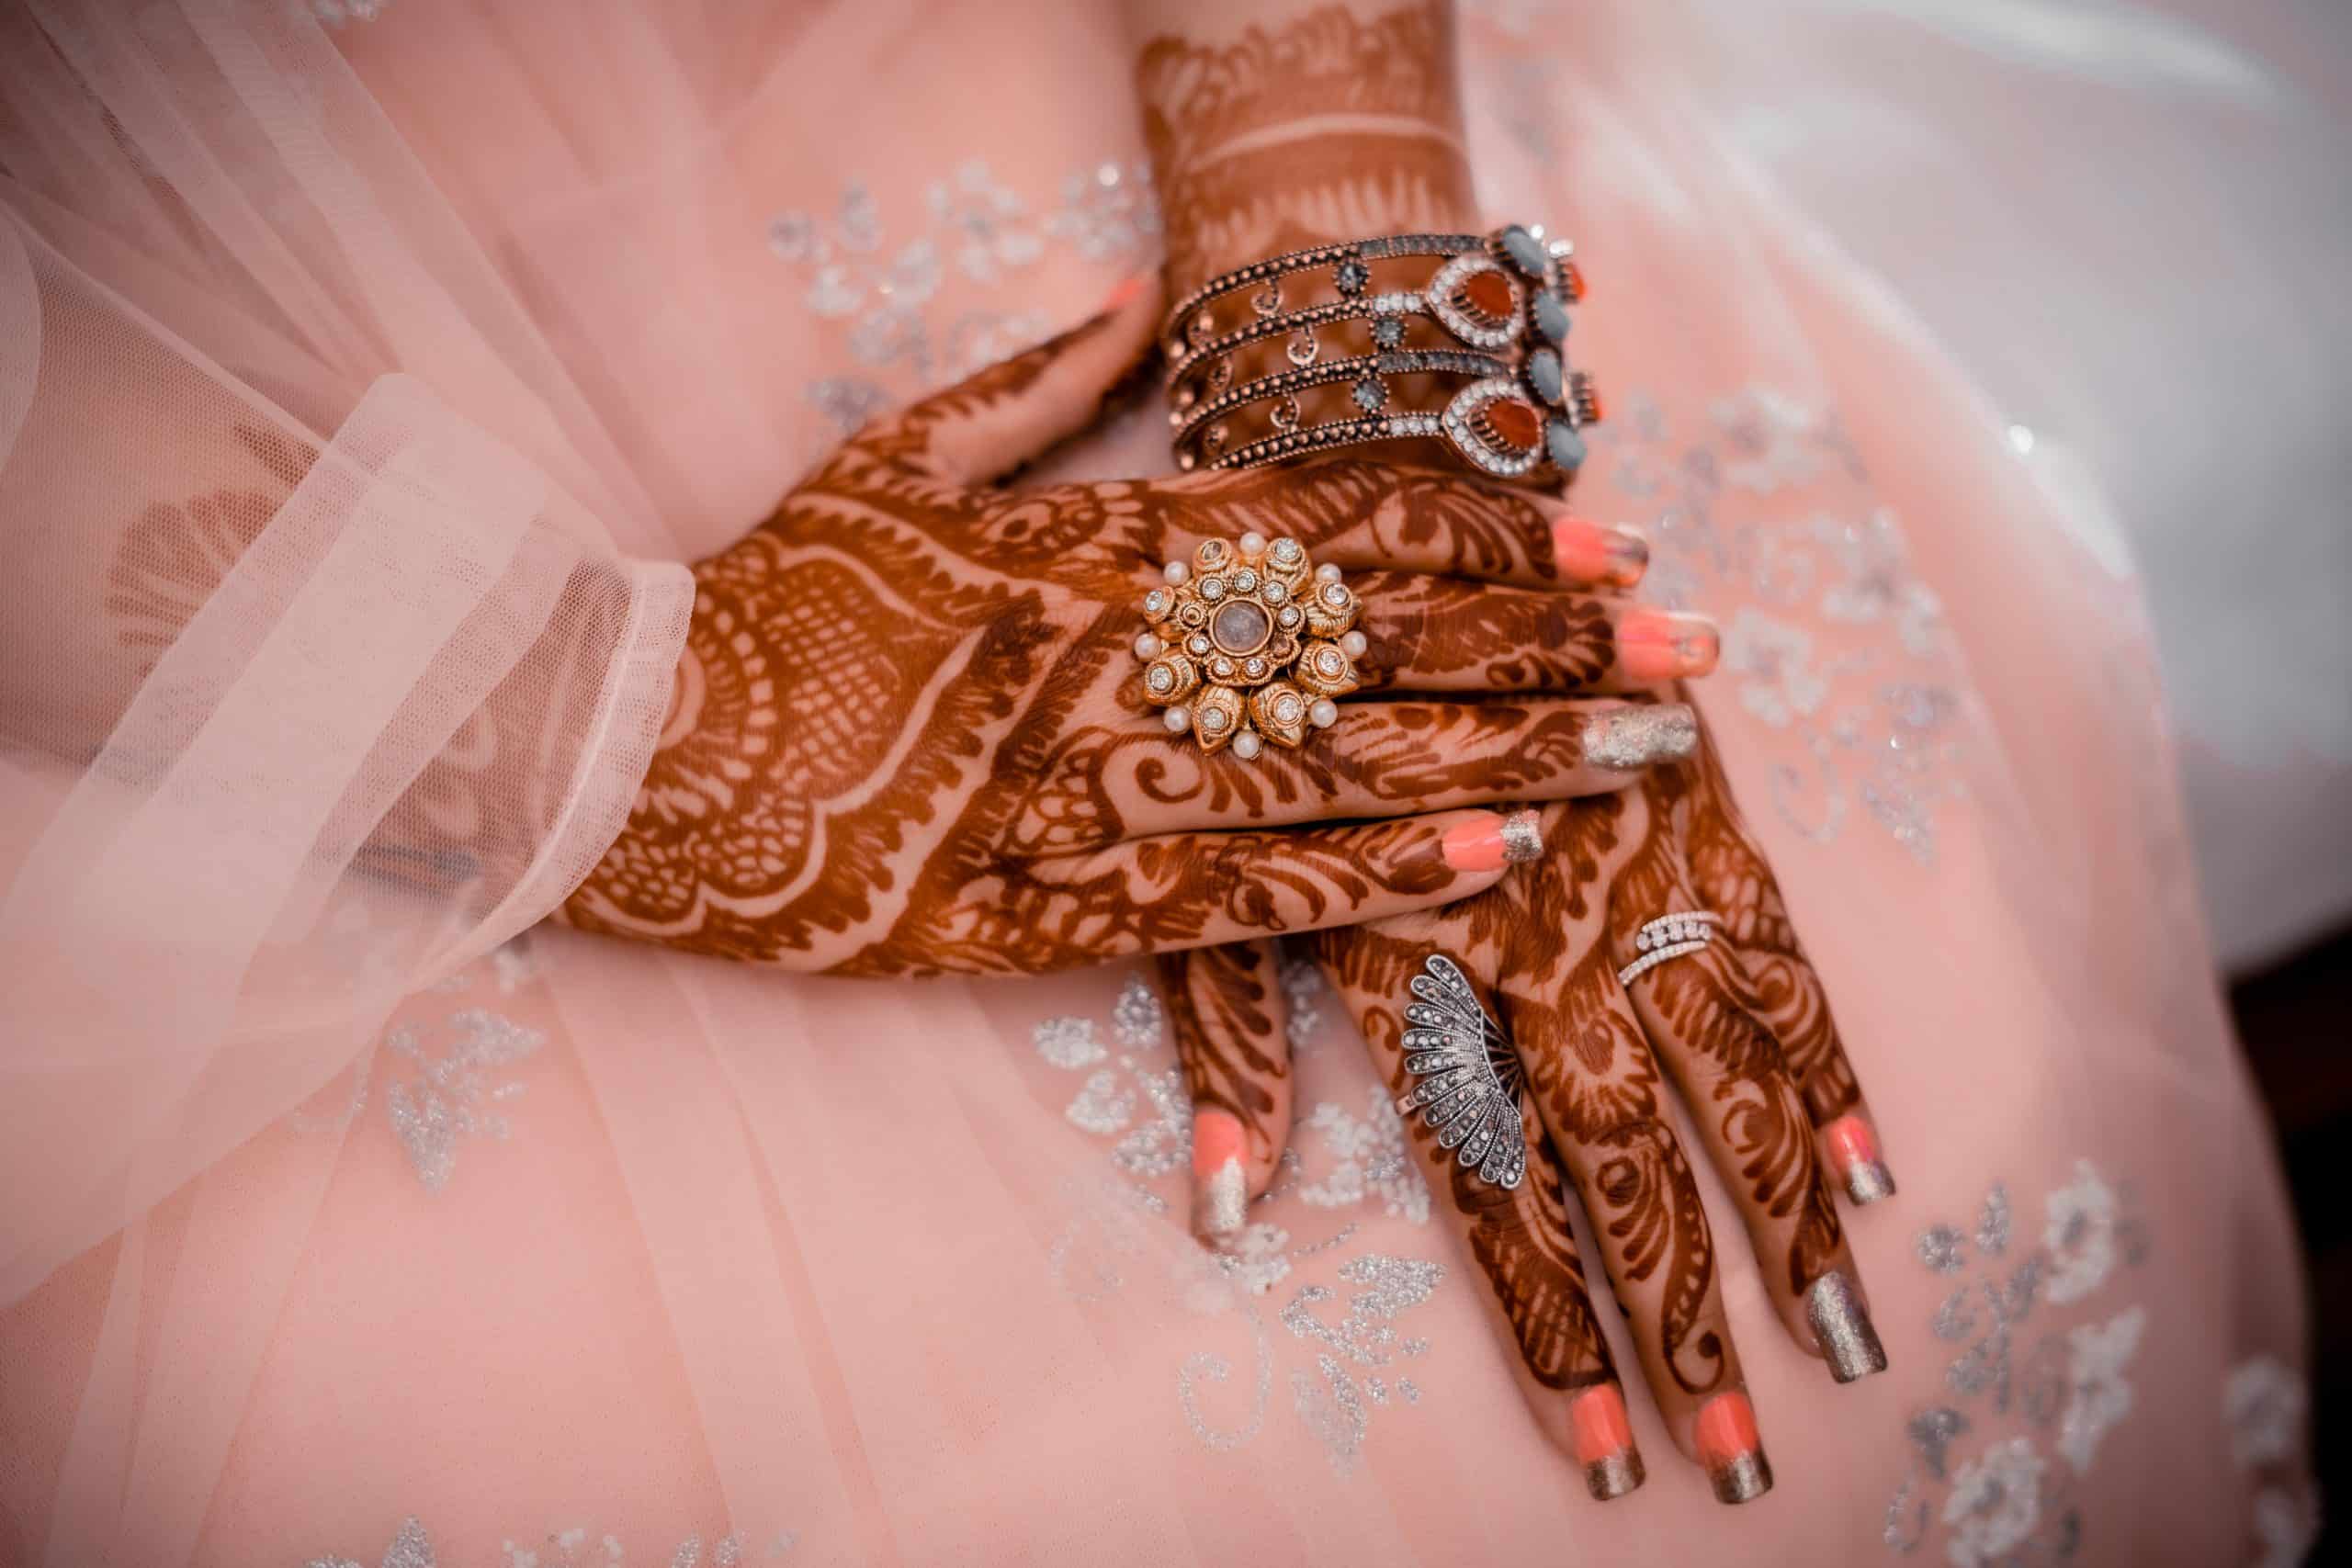 Close-up of a woman's hands with mehndi and jewelry.